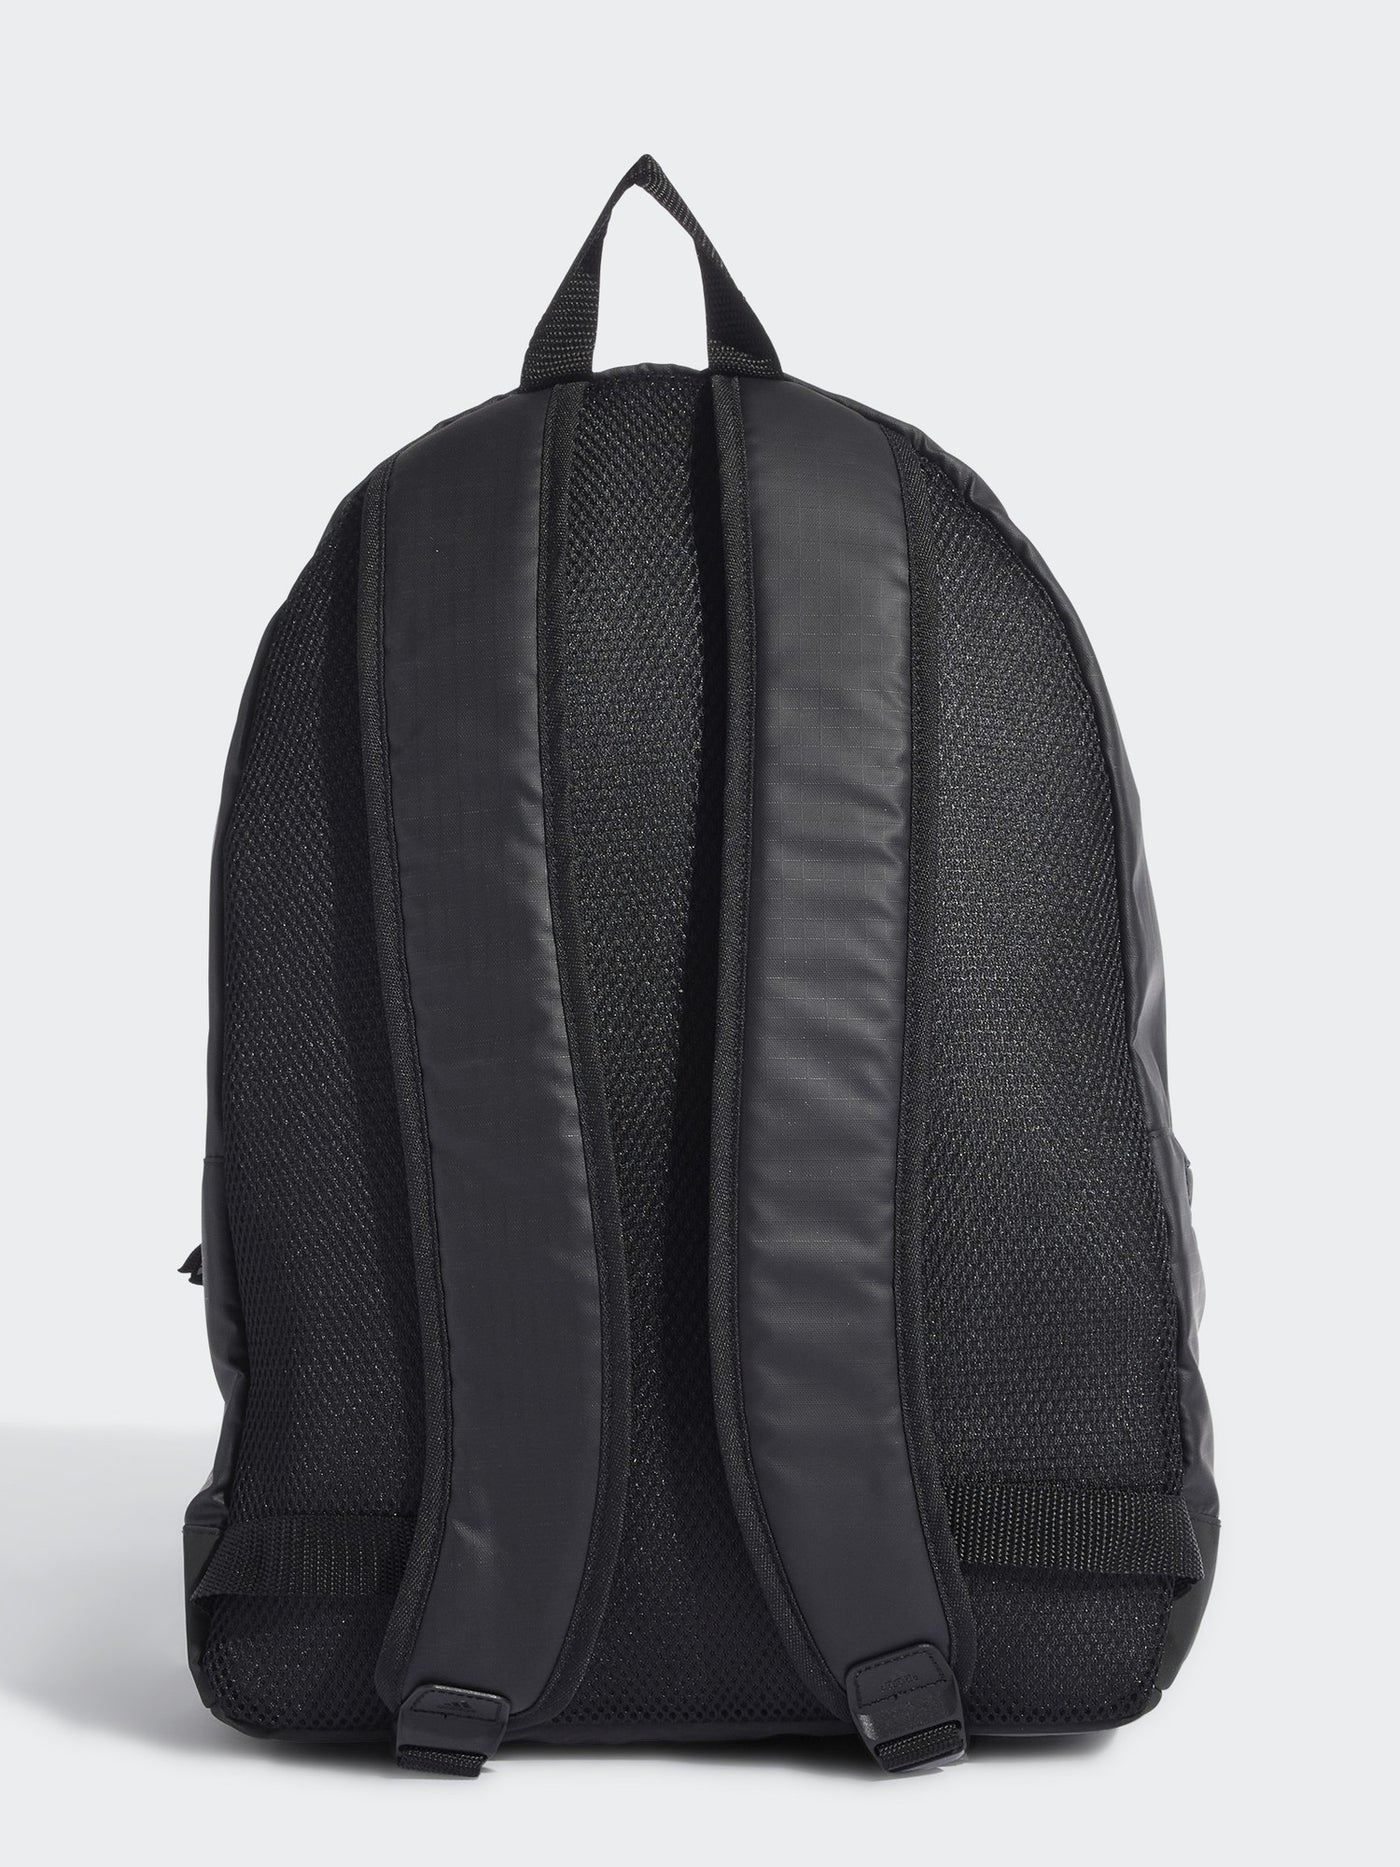 Future Icon 2 Backpack